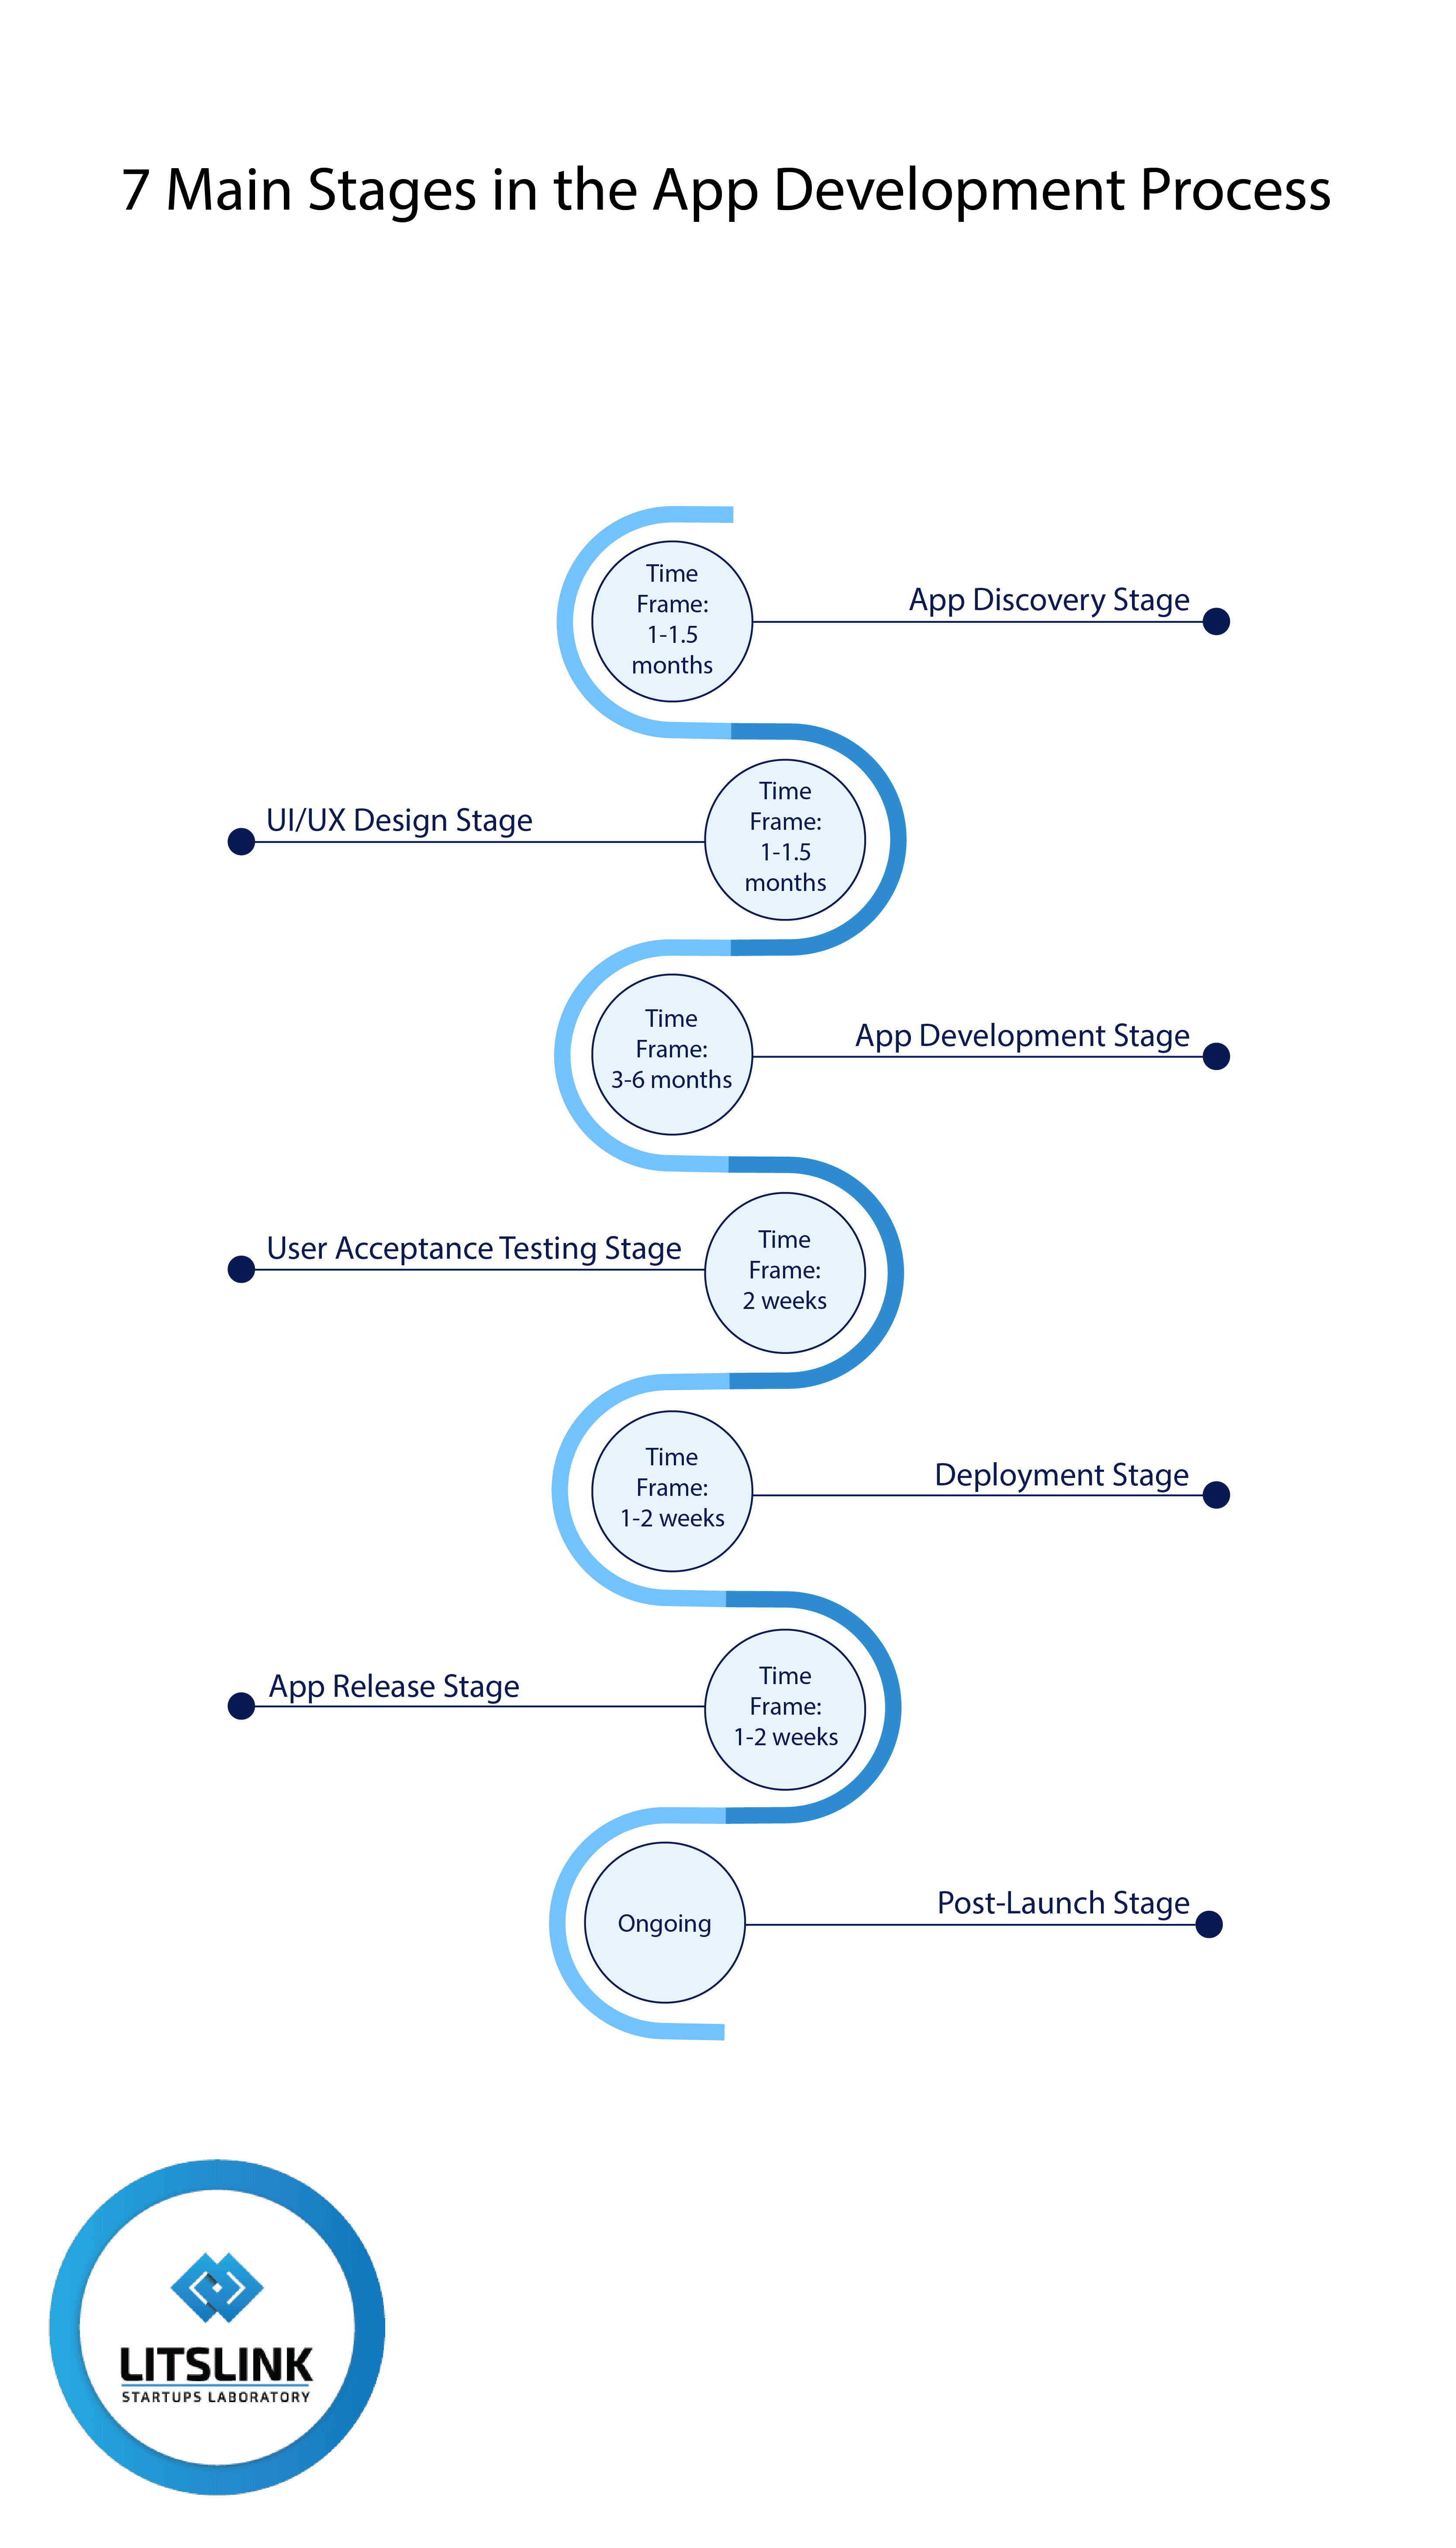 App development stages - How long does it take to develop an app | LITSLINK Blog